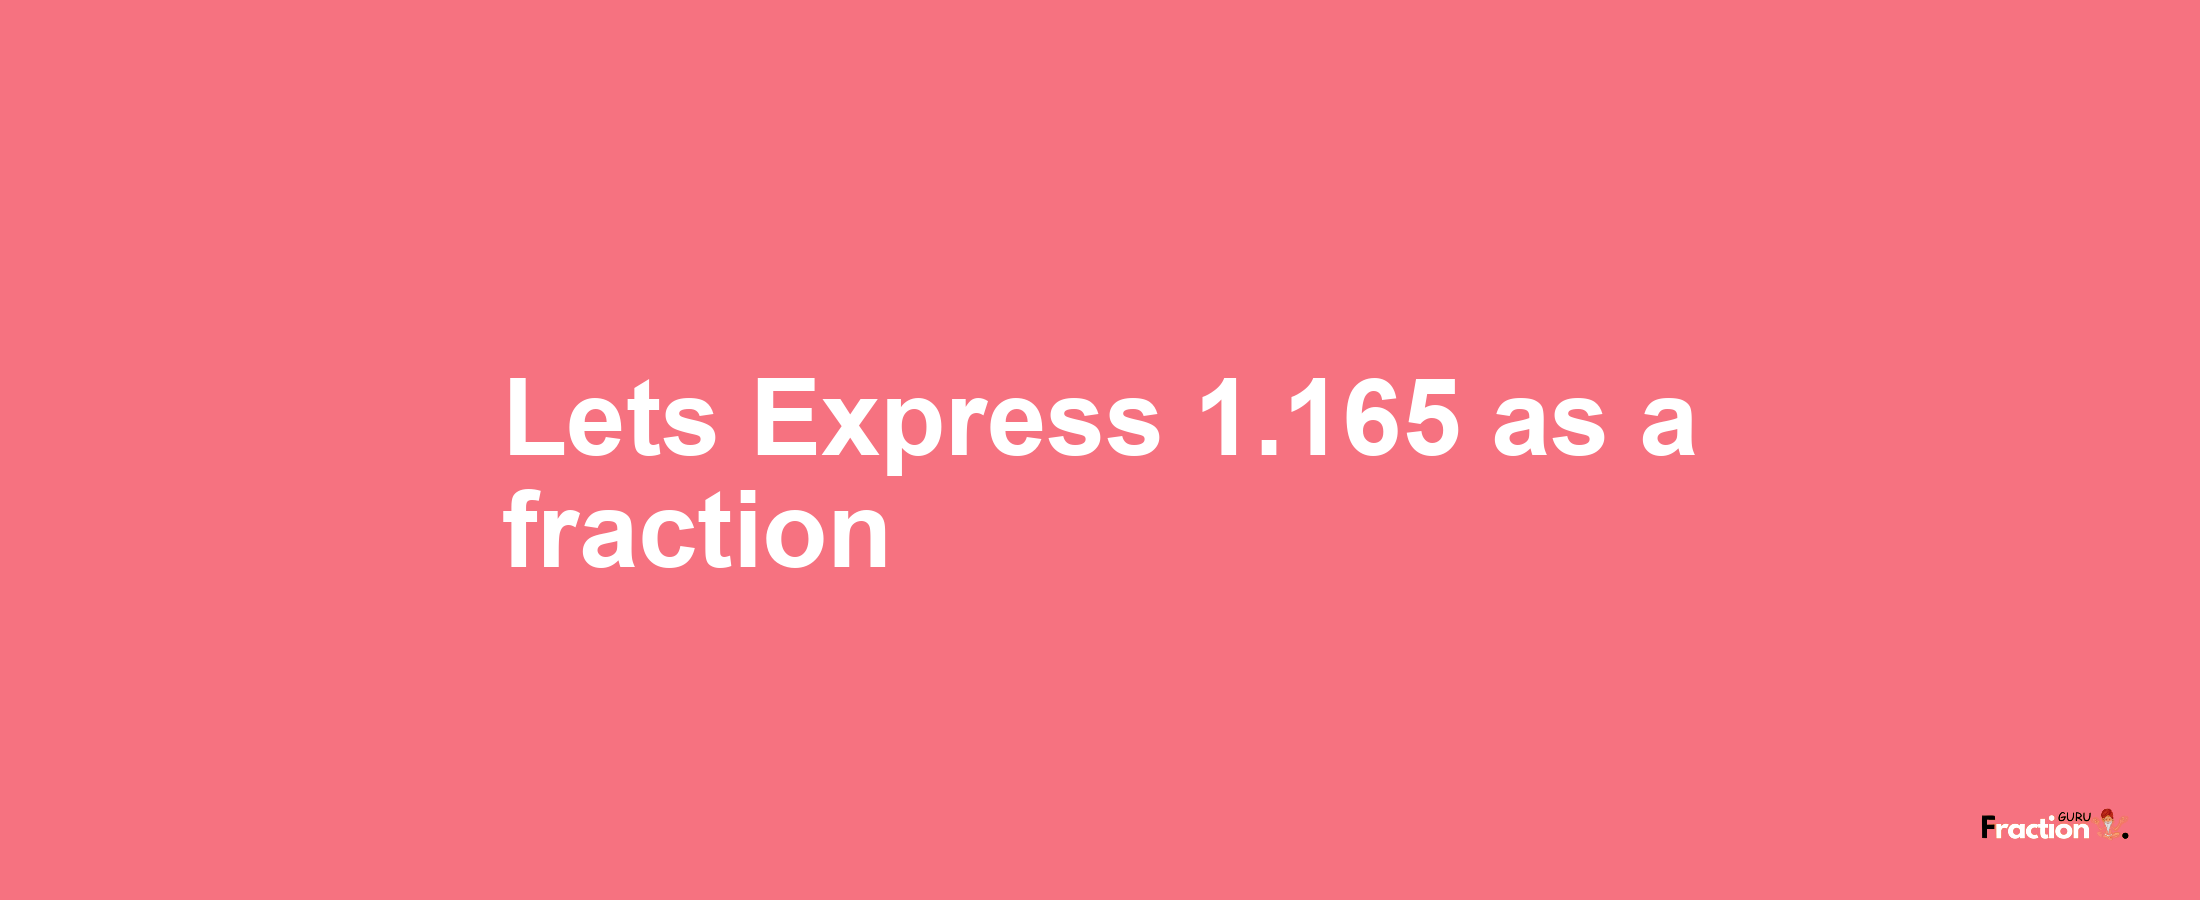 Lets Express 1.165 as afraction